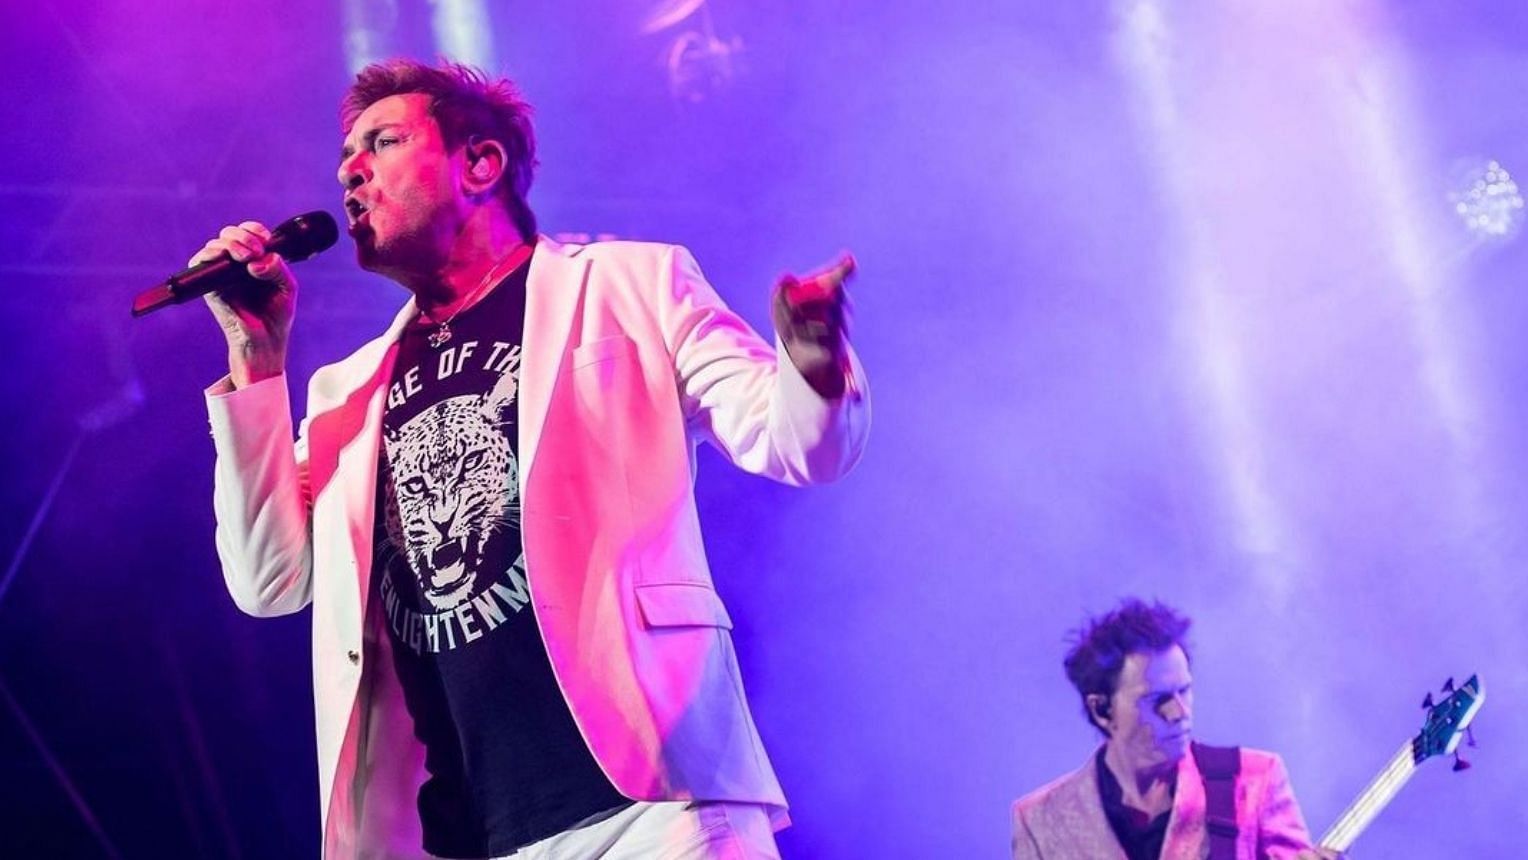 Duran Duran 2022 tour tickets Where to buy, dates, and all you need to